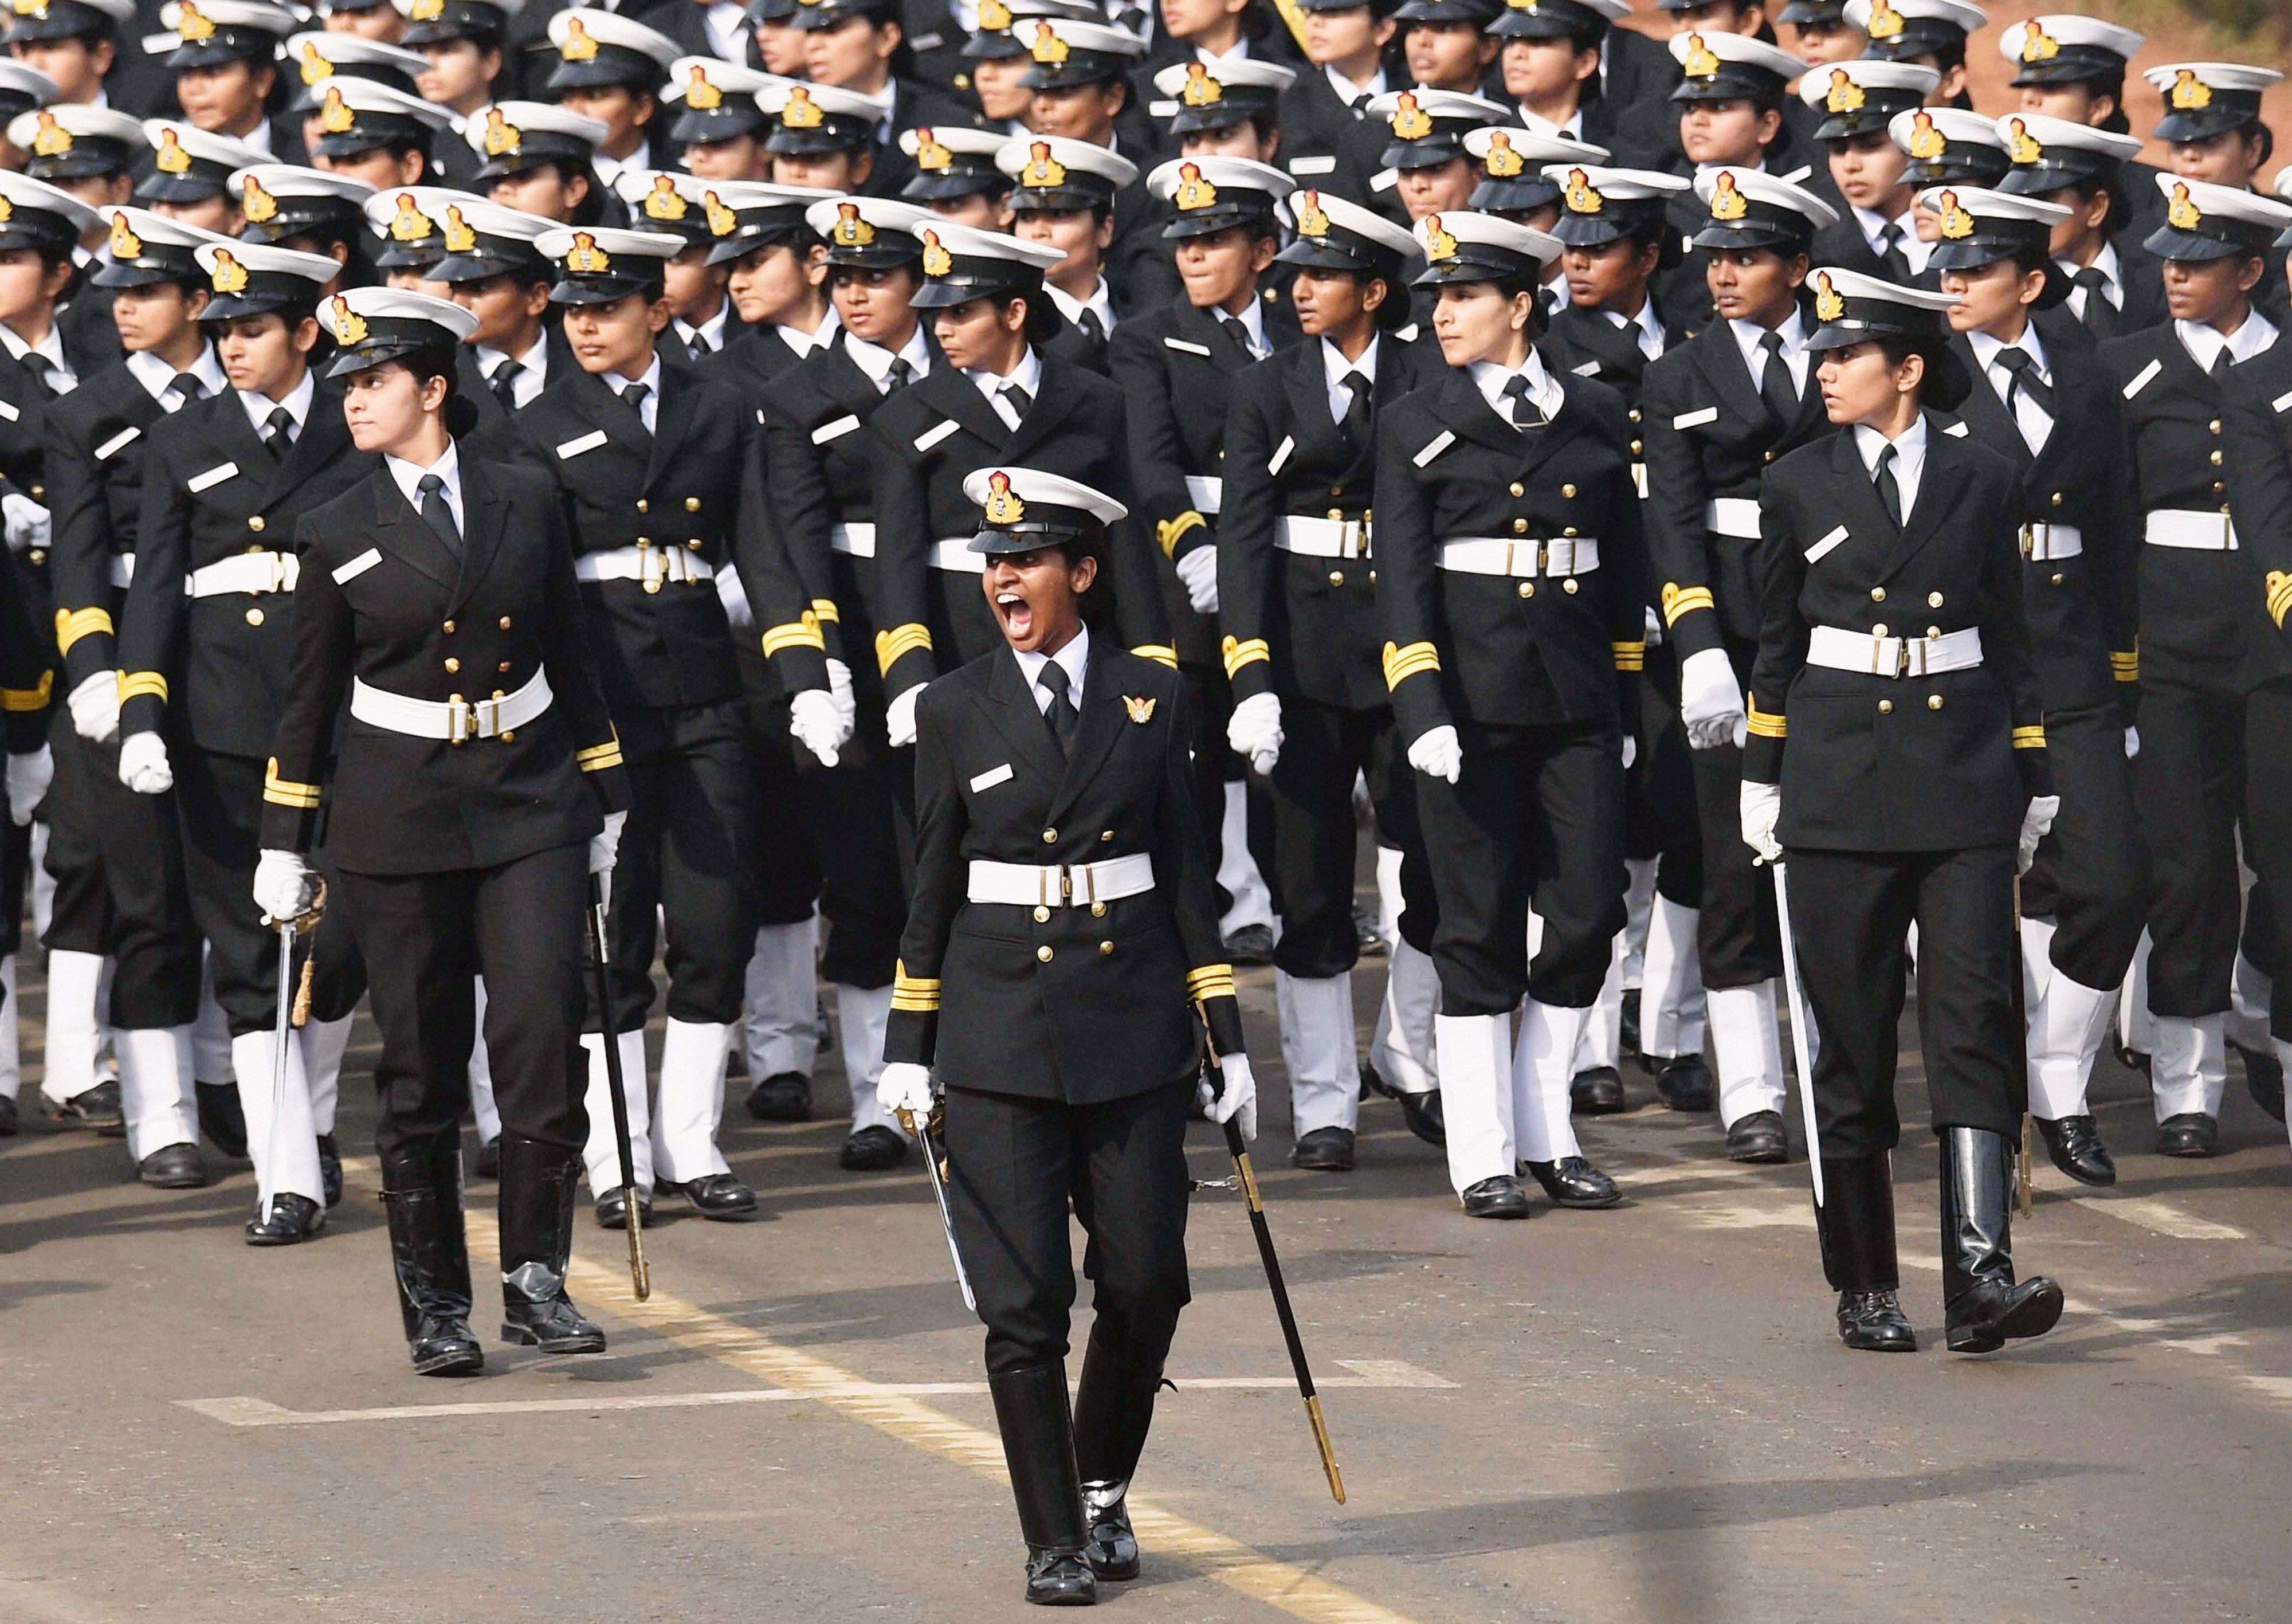 Indian Army all-women contingent marches during the full dress rehearsal for the Republic Day parade at Rajpath in New Delhi. (PTI photo by Atul Yadav)